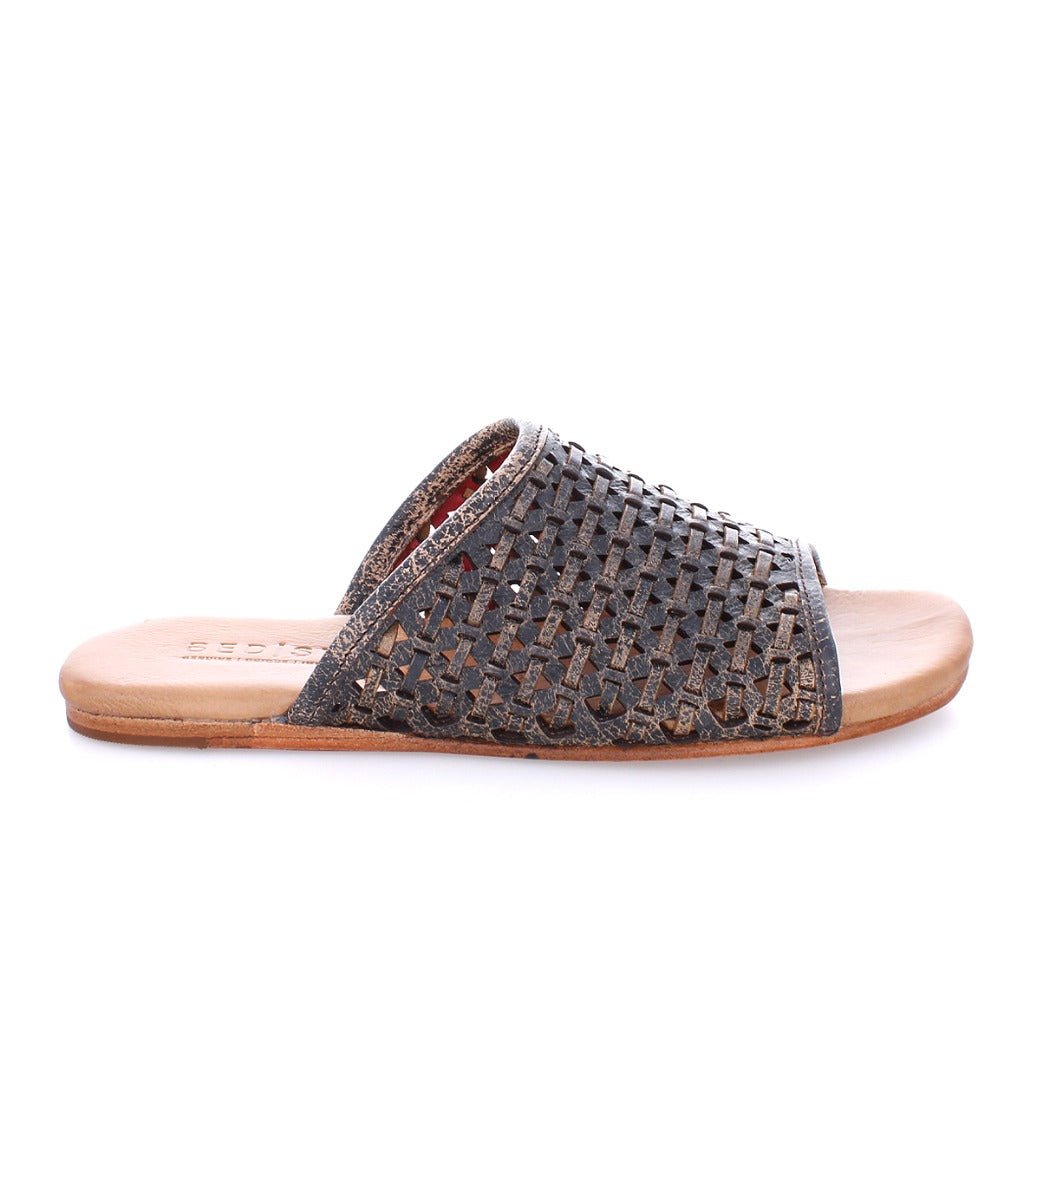 A Bed Stu Minerva women's sandal with woven straps and a leather sole.